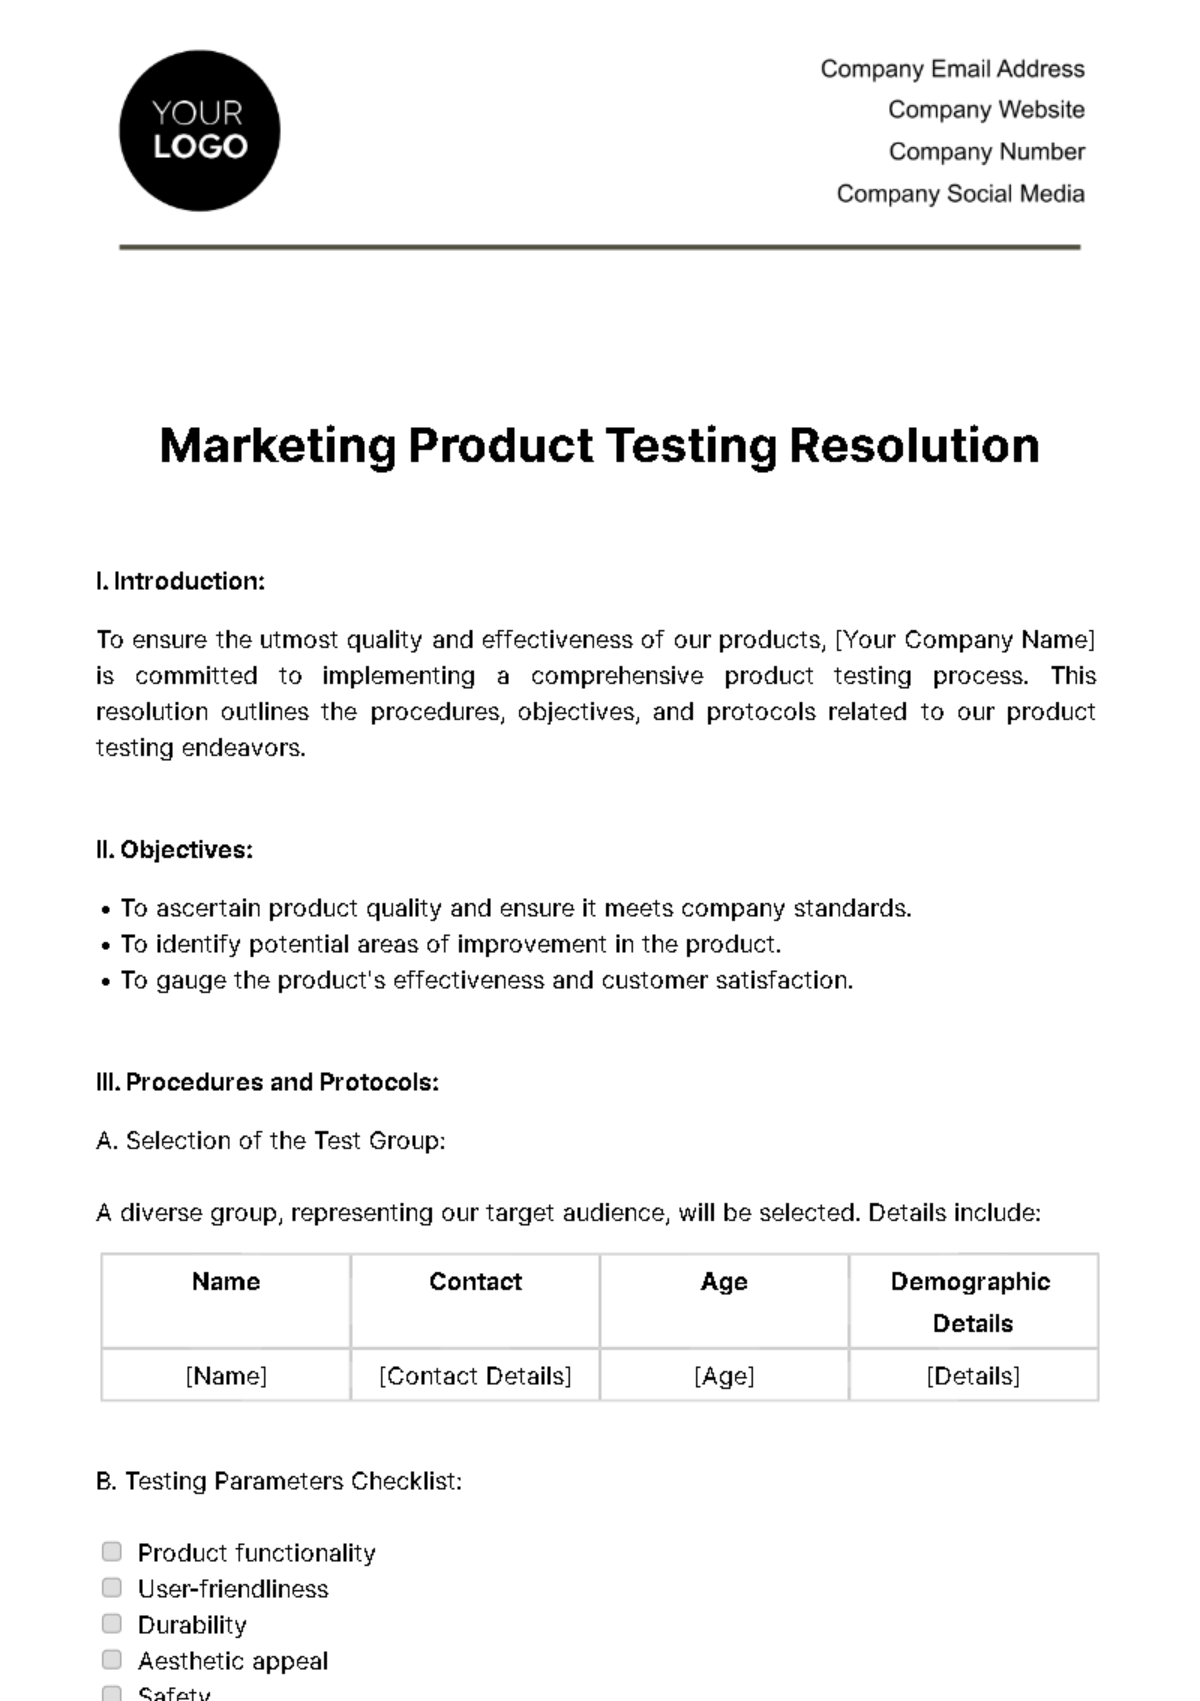 Free Marketing Product Testing Resolution Template